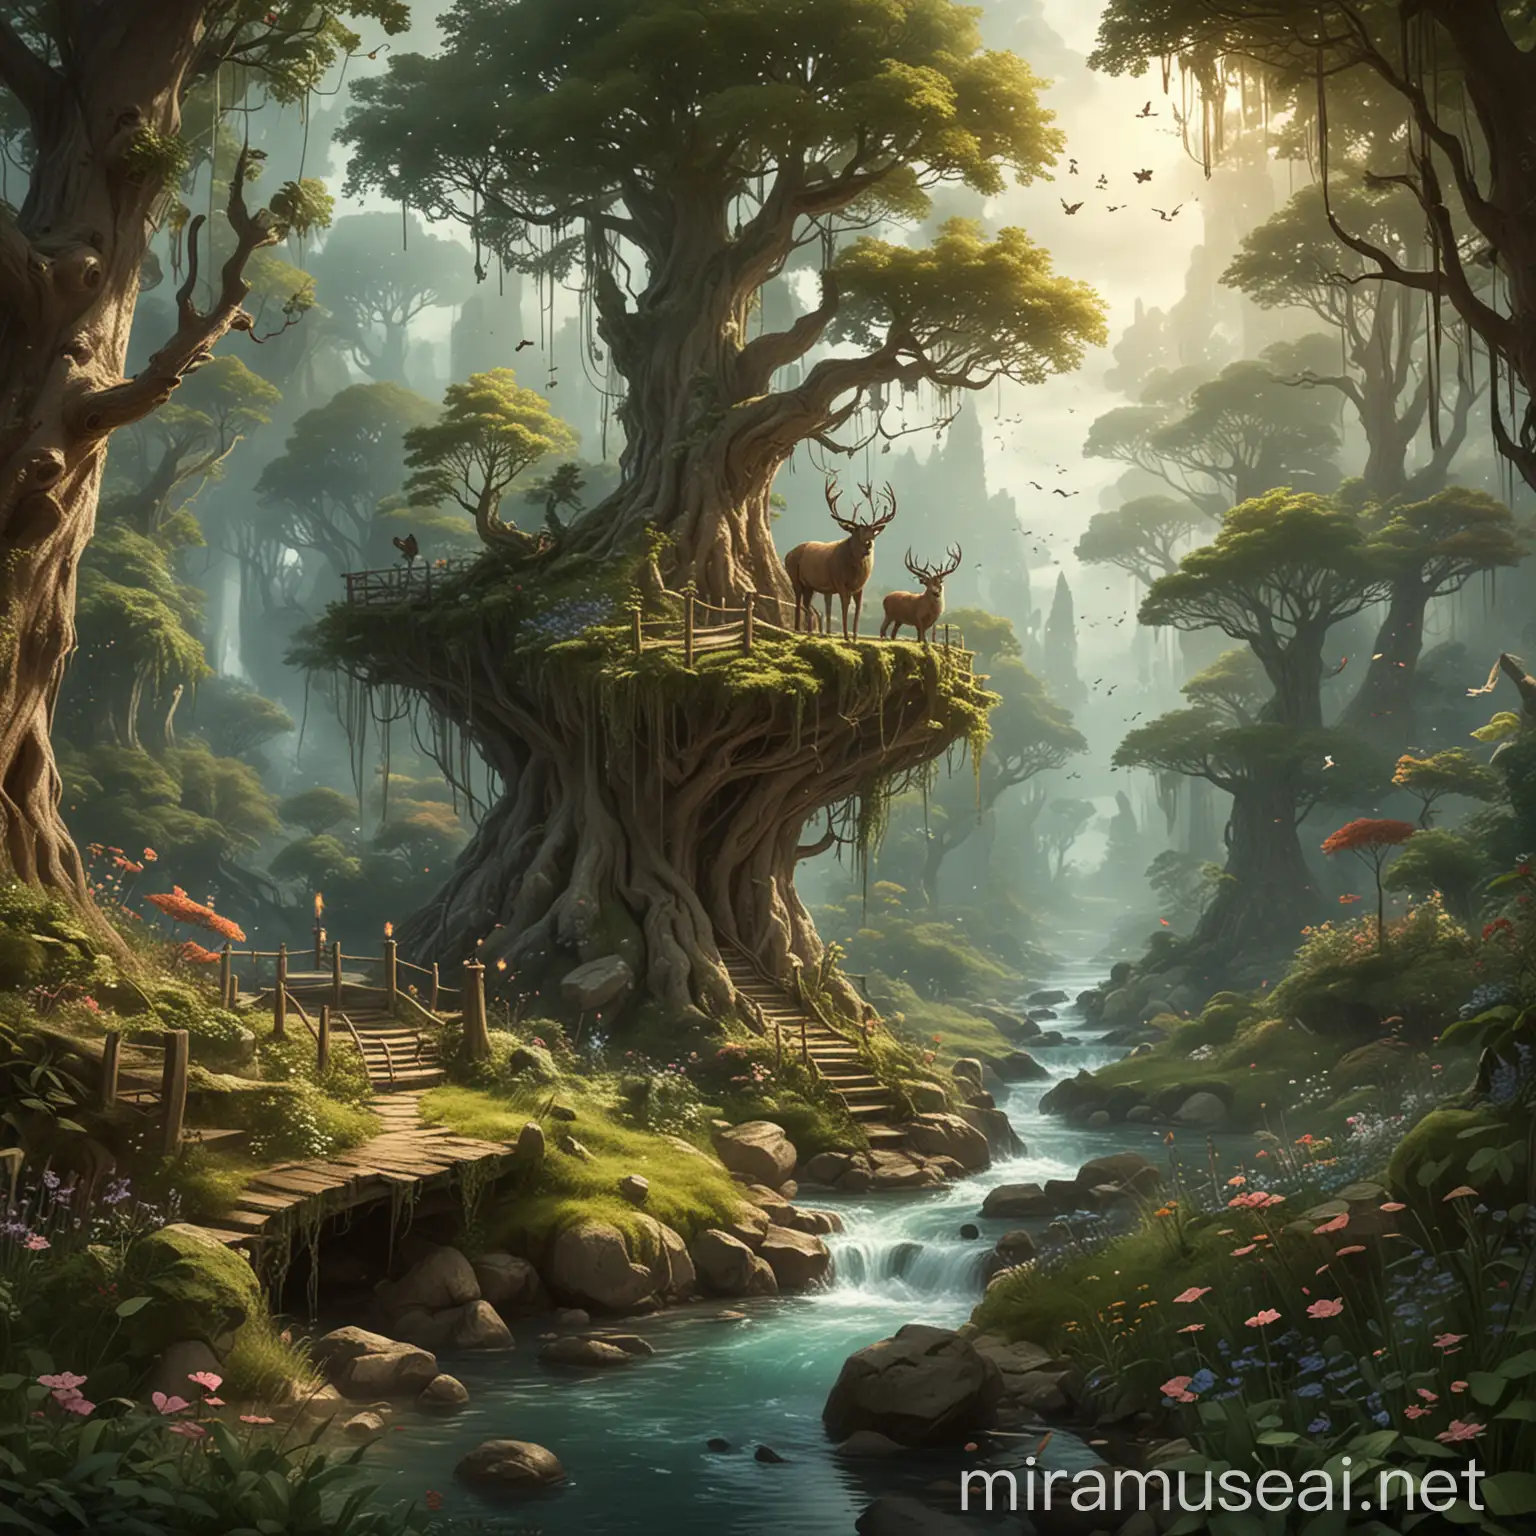 Let your imagination soar and sketch fantastical scenes inspired by the themes and imagery prevalent in Romantic music. Create landscapes inhabited by mythical creatures, enchanted forests, or dreamlike realms.